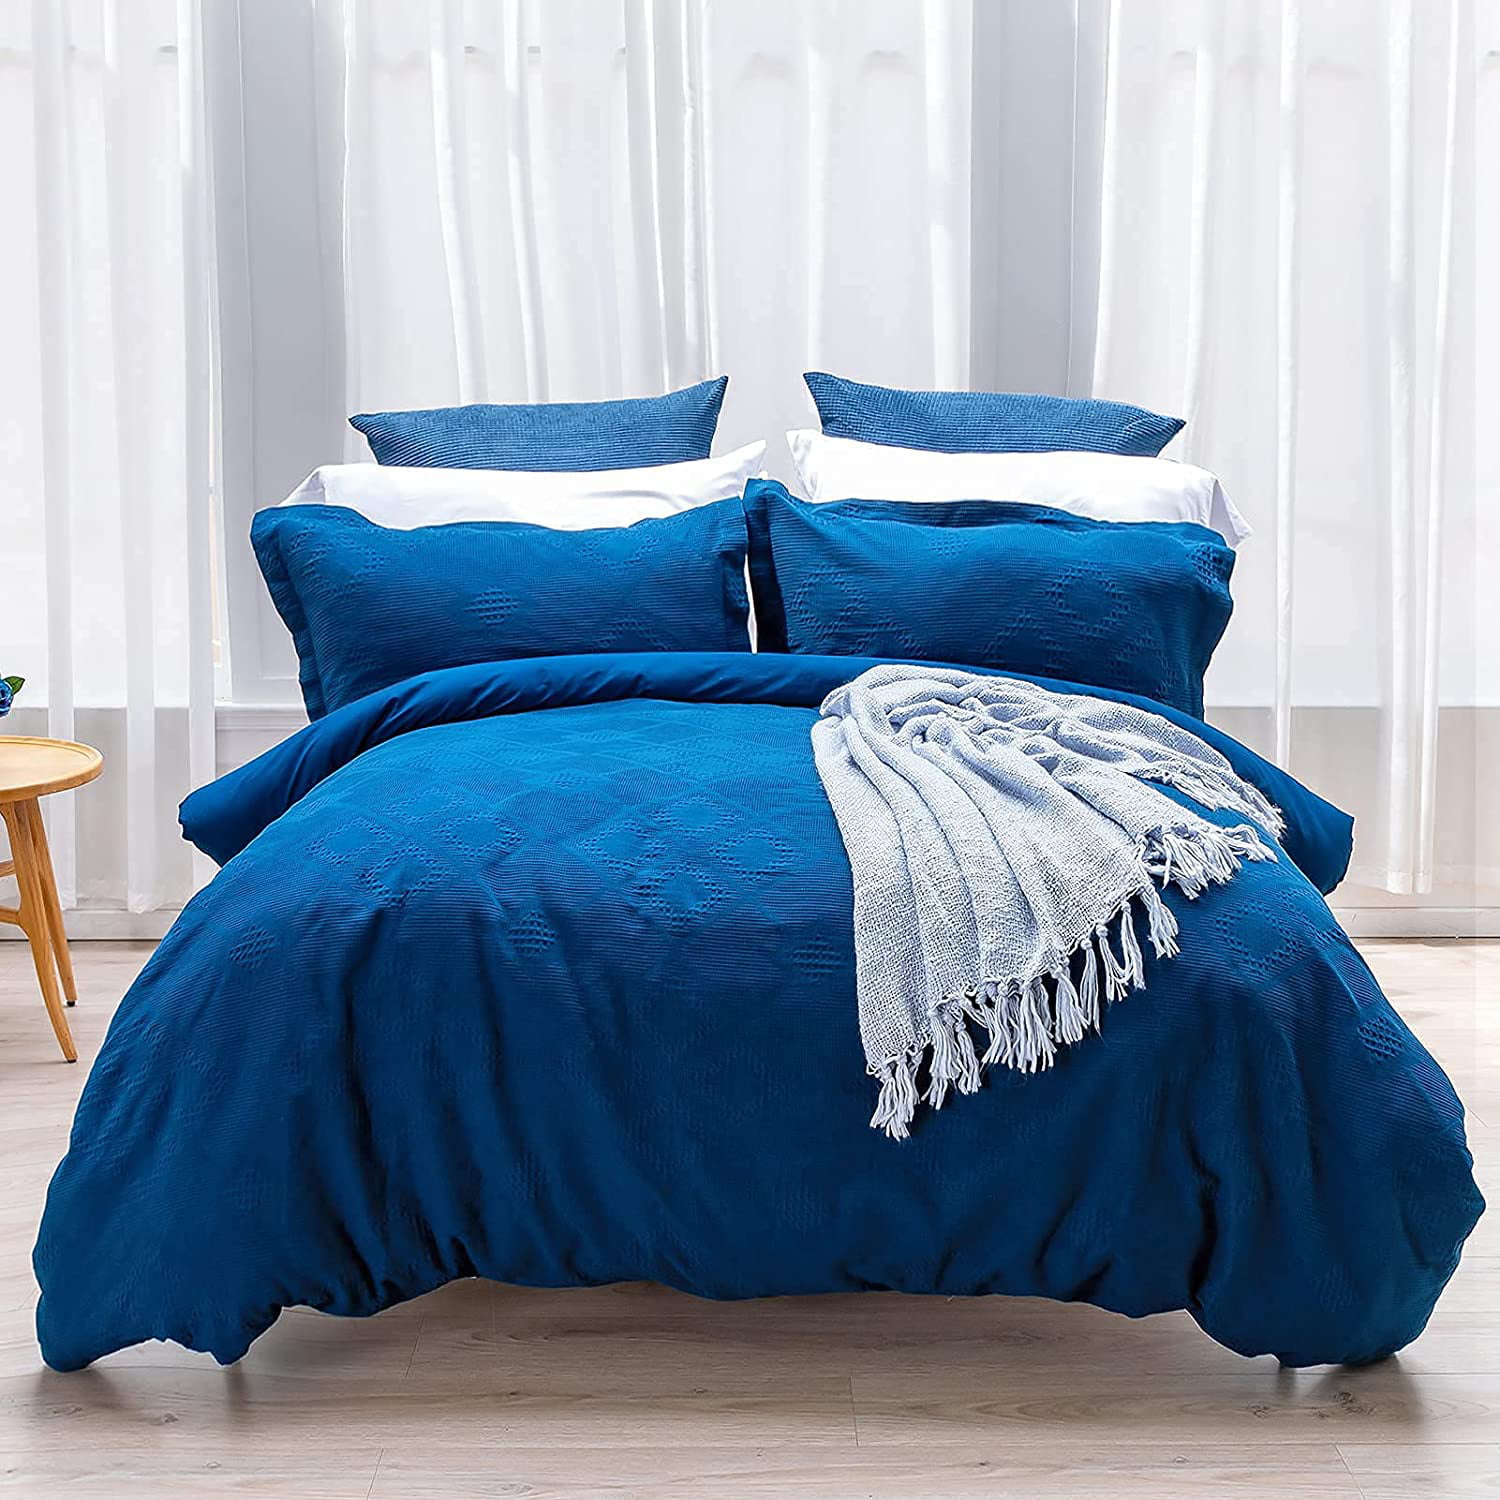 100 Cotton Waffle Weave Duvet Cover, Queen Duvet Cover Size In Inches